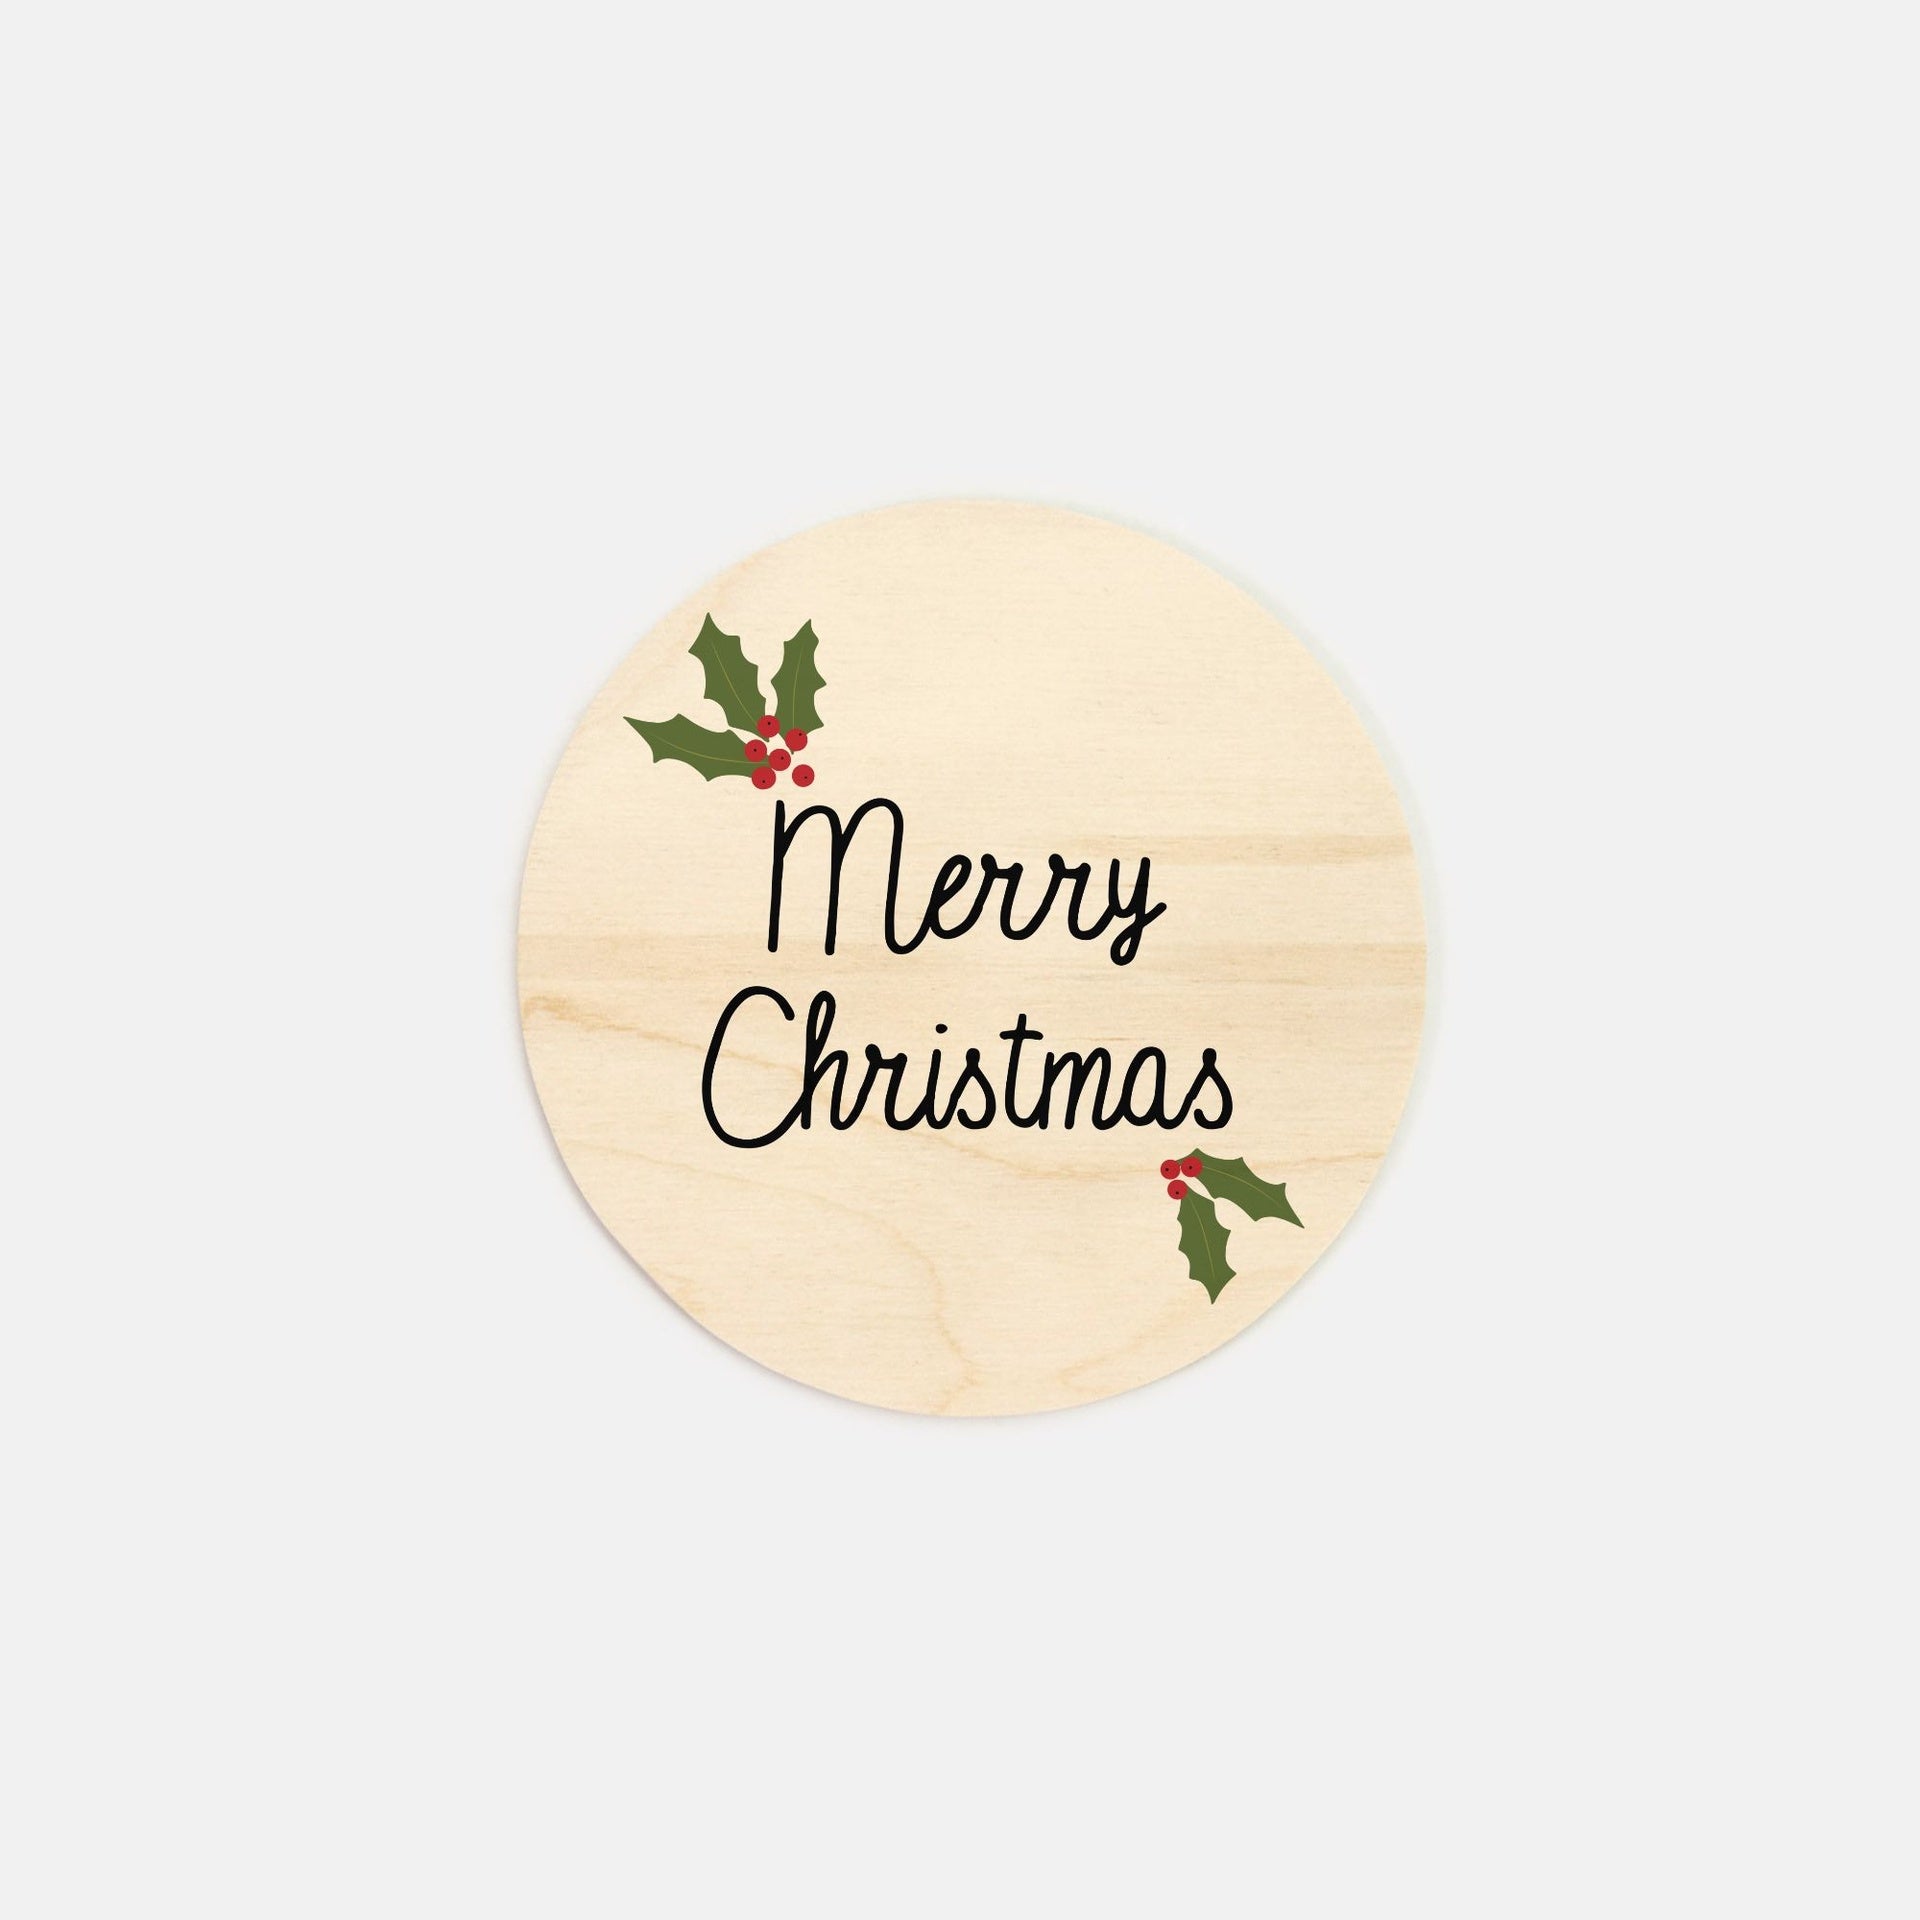 6" Round Wood Sign - Merry Christmas Holly